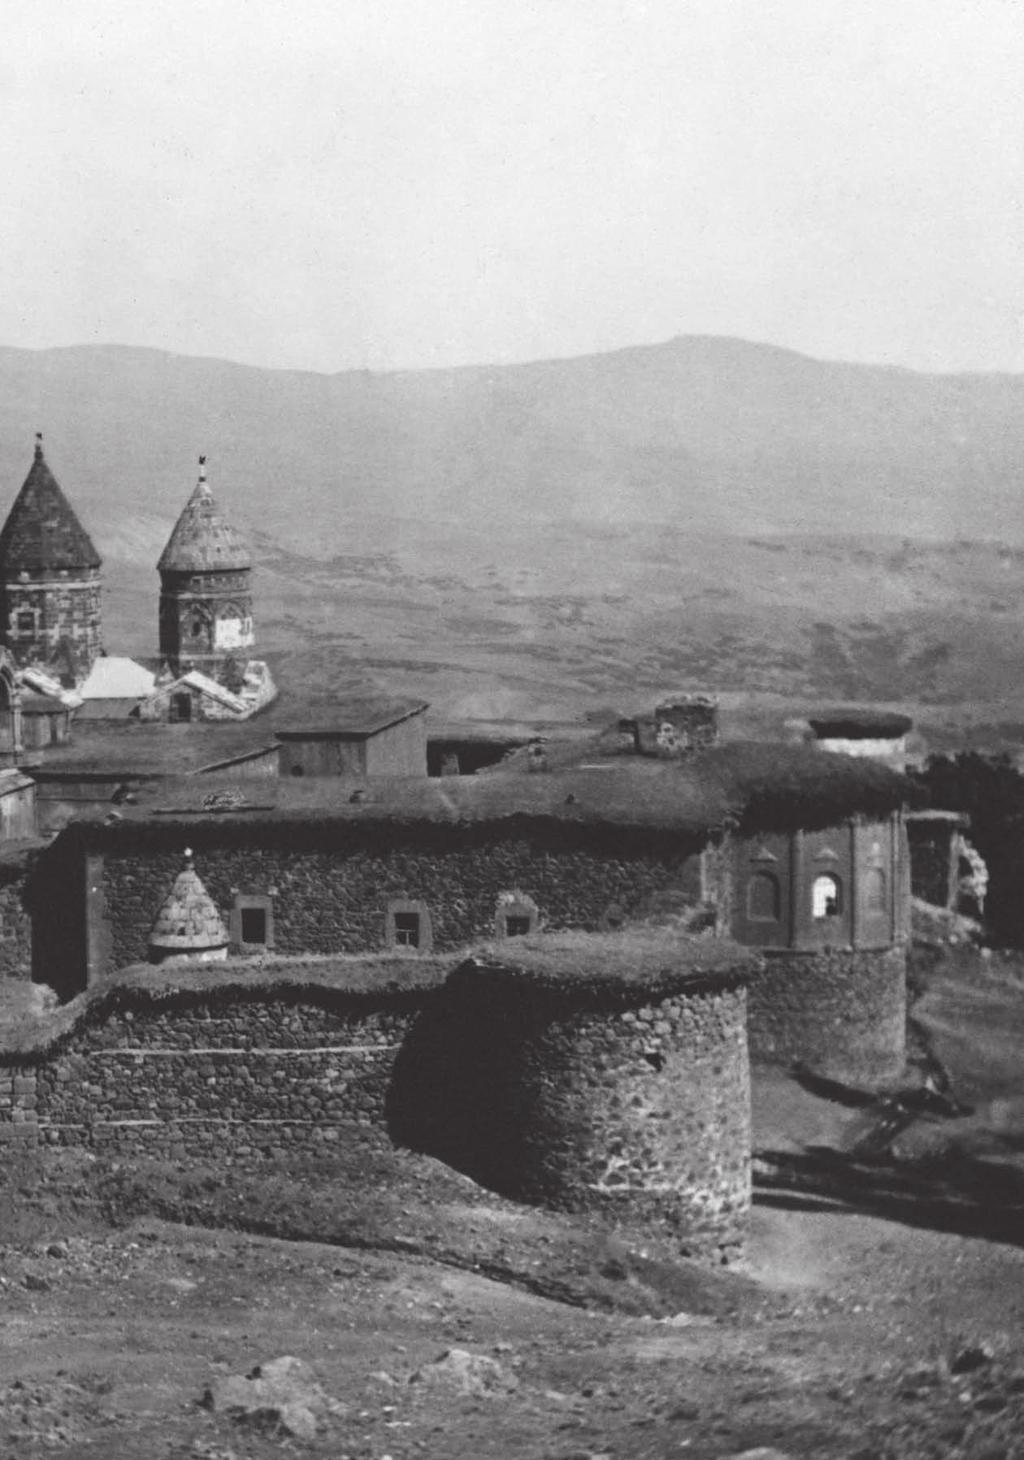 Photograph of Armenian monastery of Surb Karapet (the Holy Precursor, St. John the Baptist) in 30 km northwest of Mush, in present-day eastern Turkey, before its destruction in 1915. Photo: Vartan A.